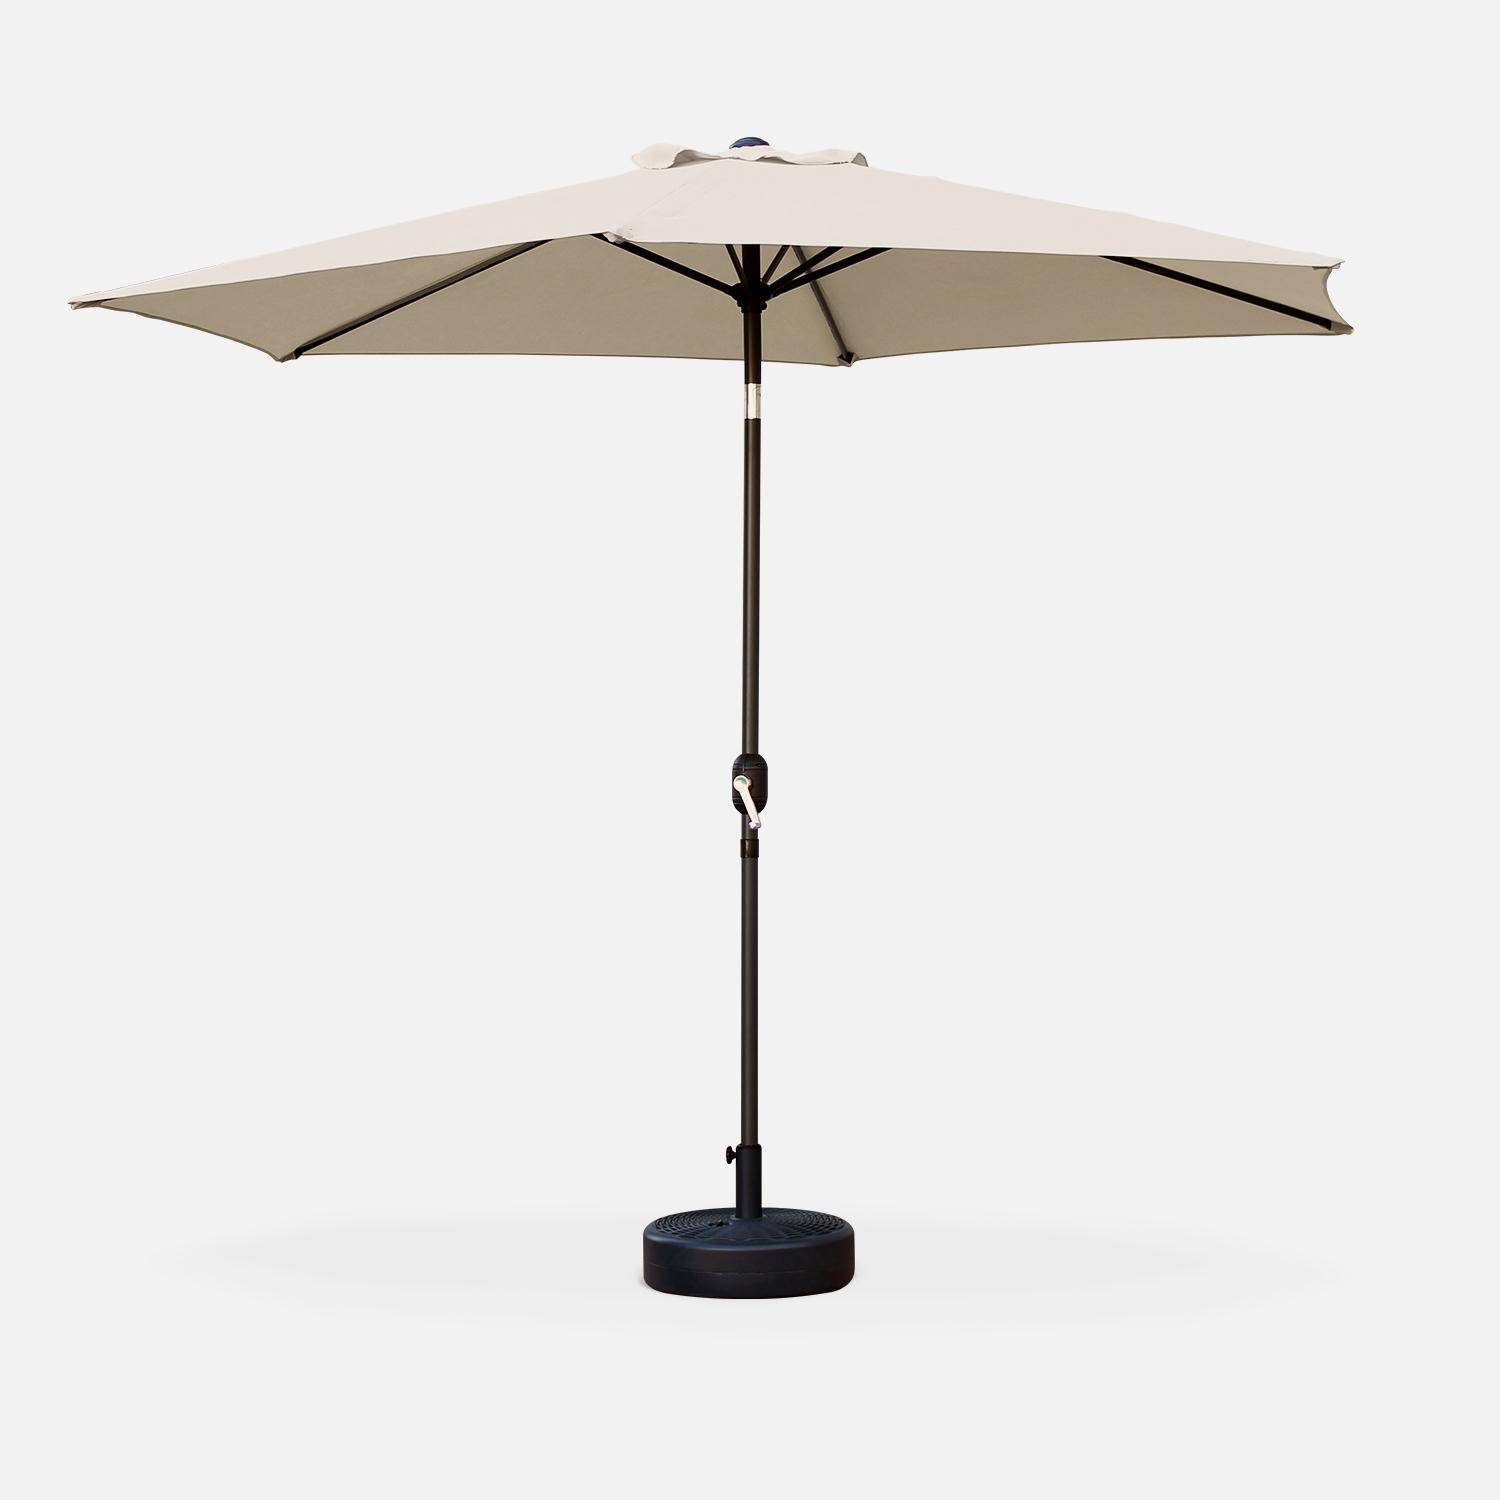 3m round centre pole parasol - adjustable aluminium central mast and crank handle opening - Touquet - Sand,sweeek,Photo3